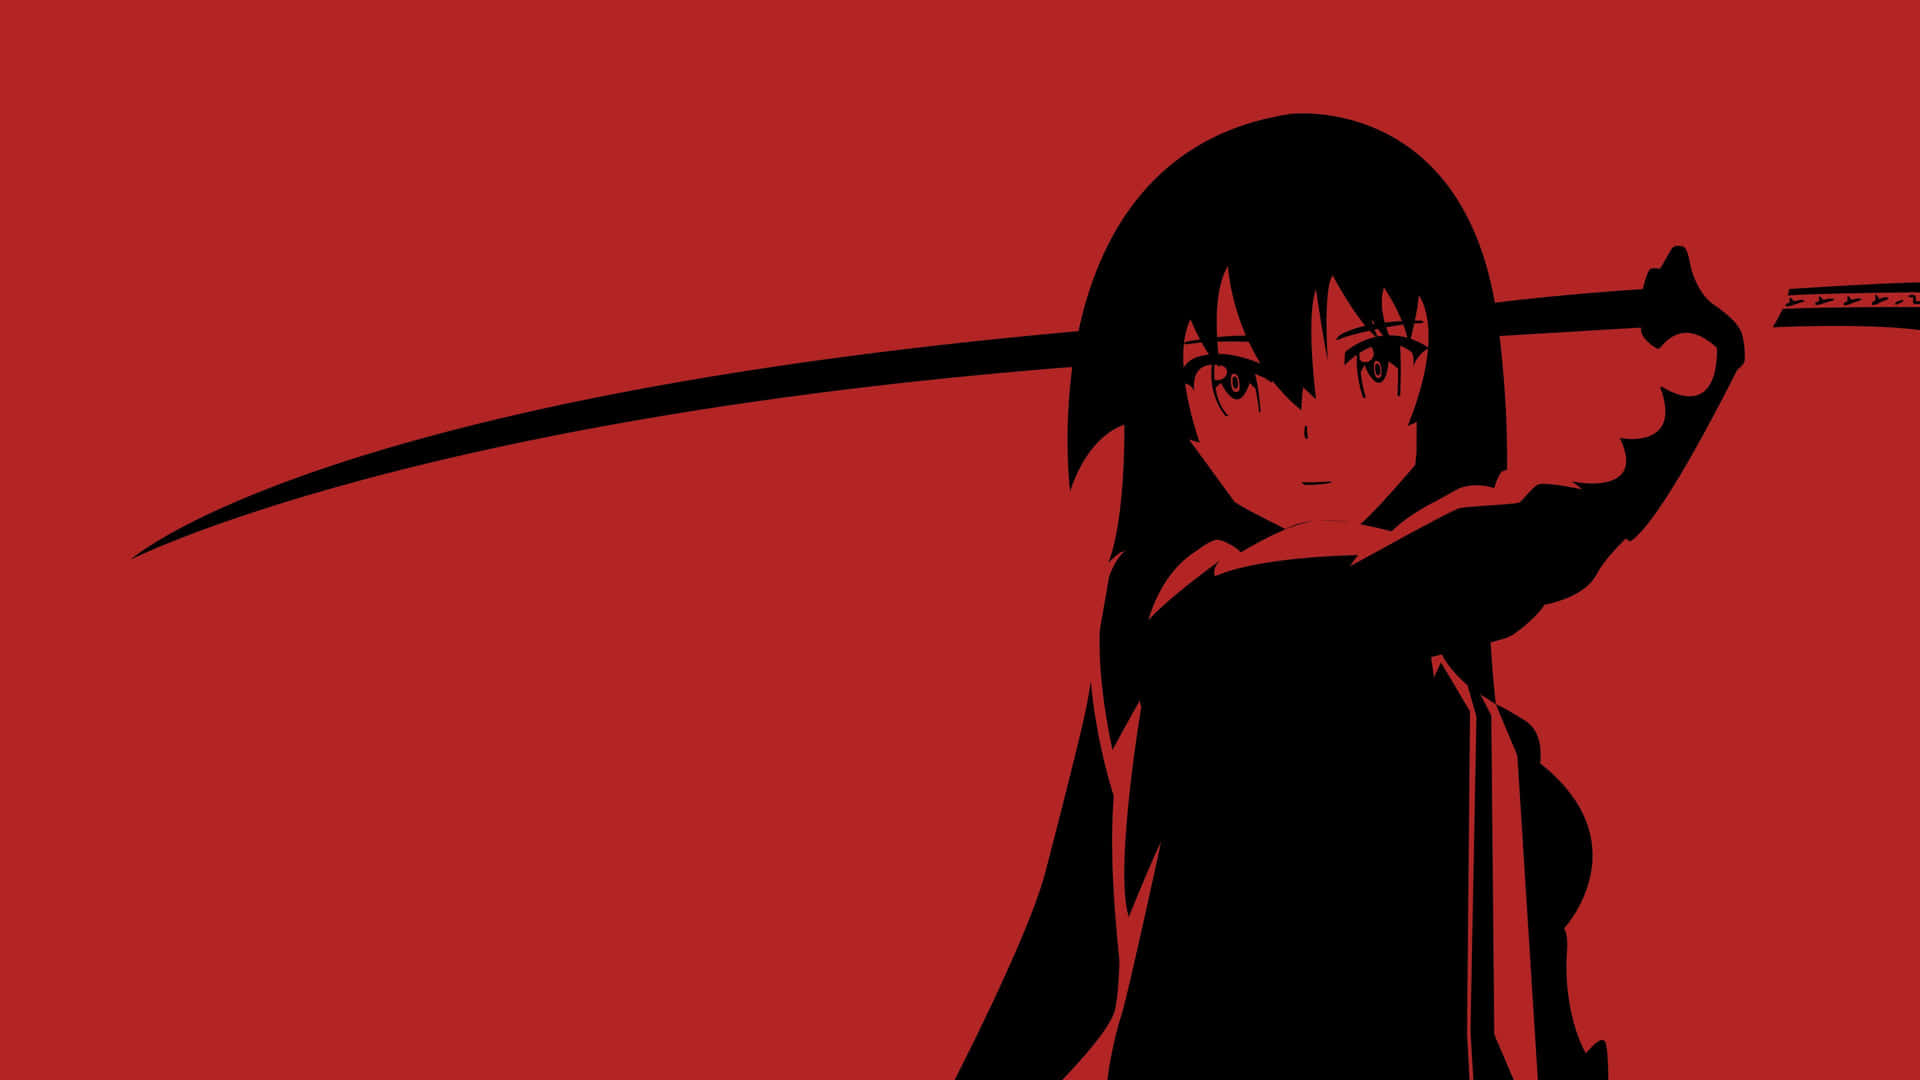 A Red Aesthetic Anime-Themed Laptop. Wallpaper